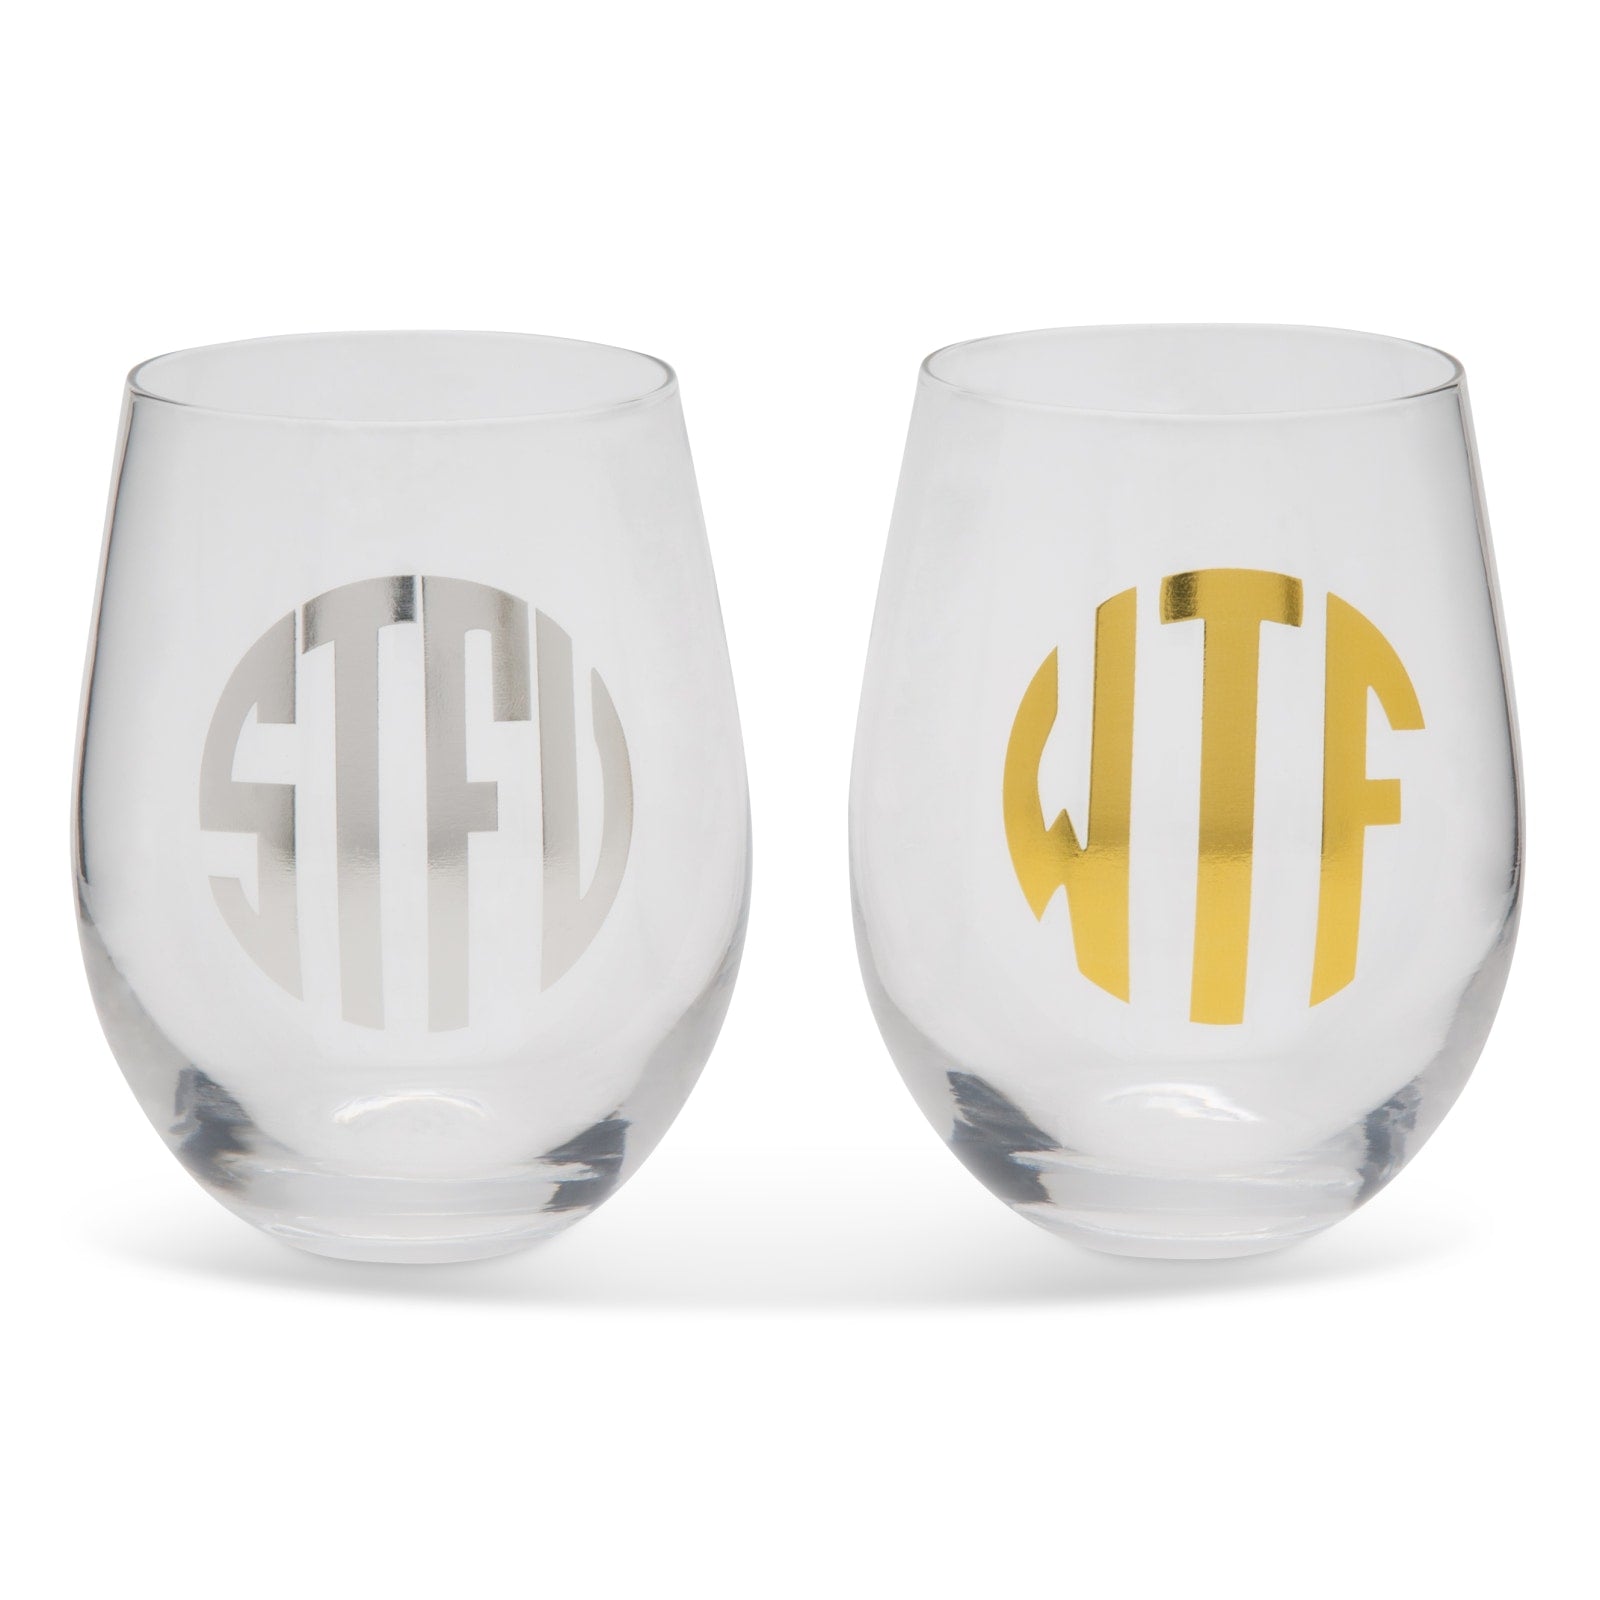 "What the....." Monogrammed Wine Glasses